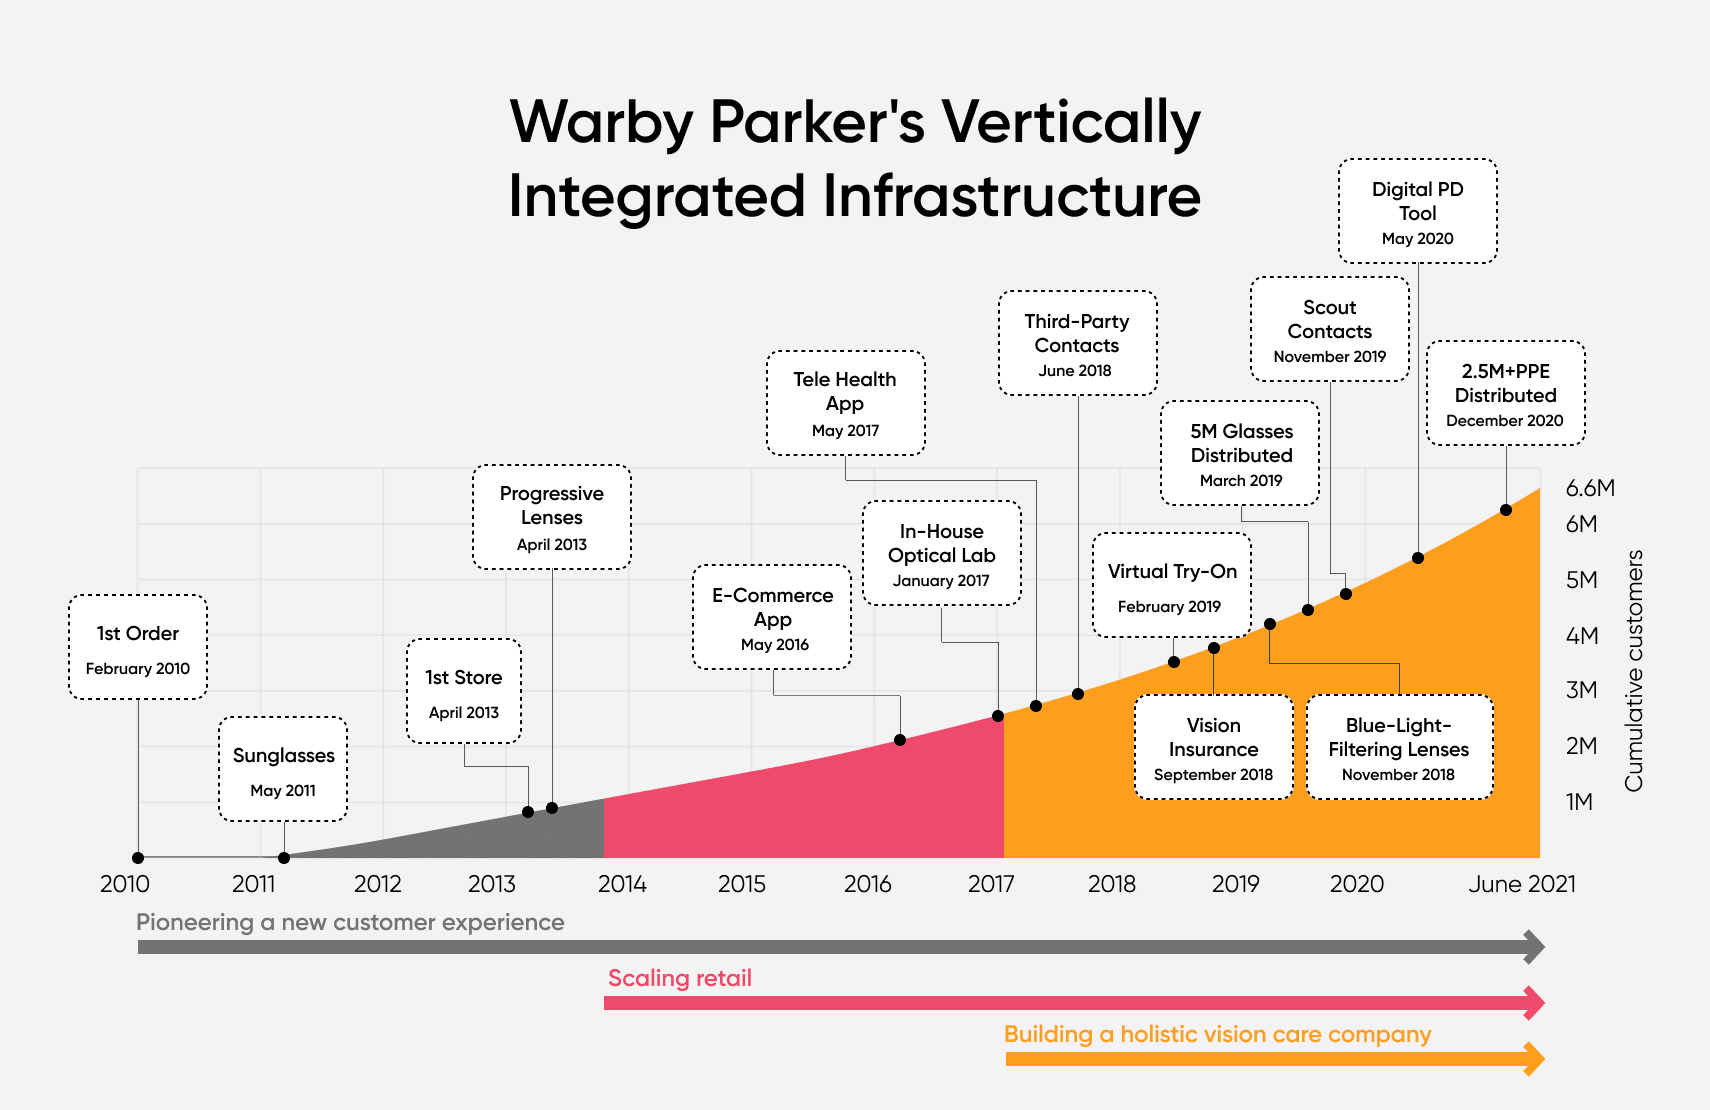 Warby Parker's vertically integrated structure